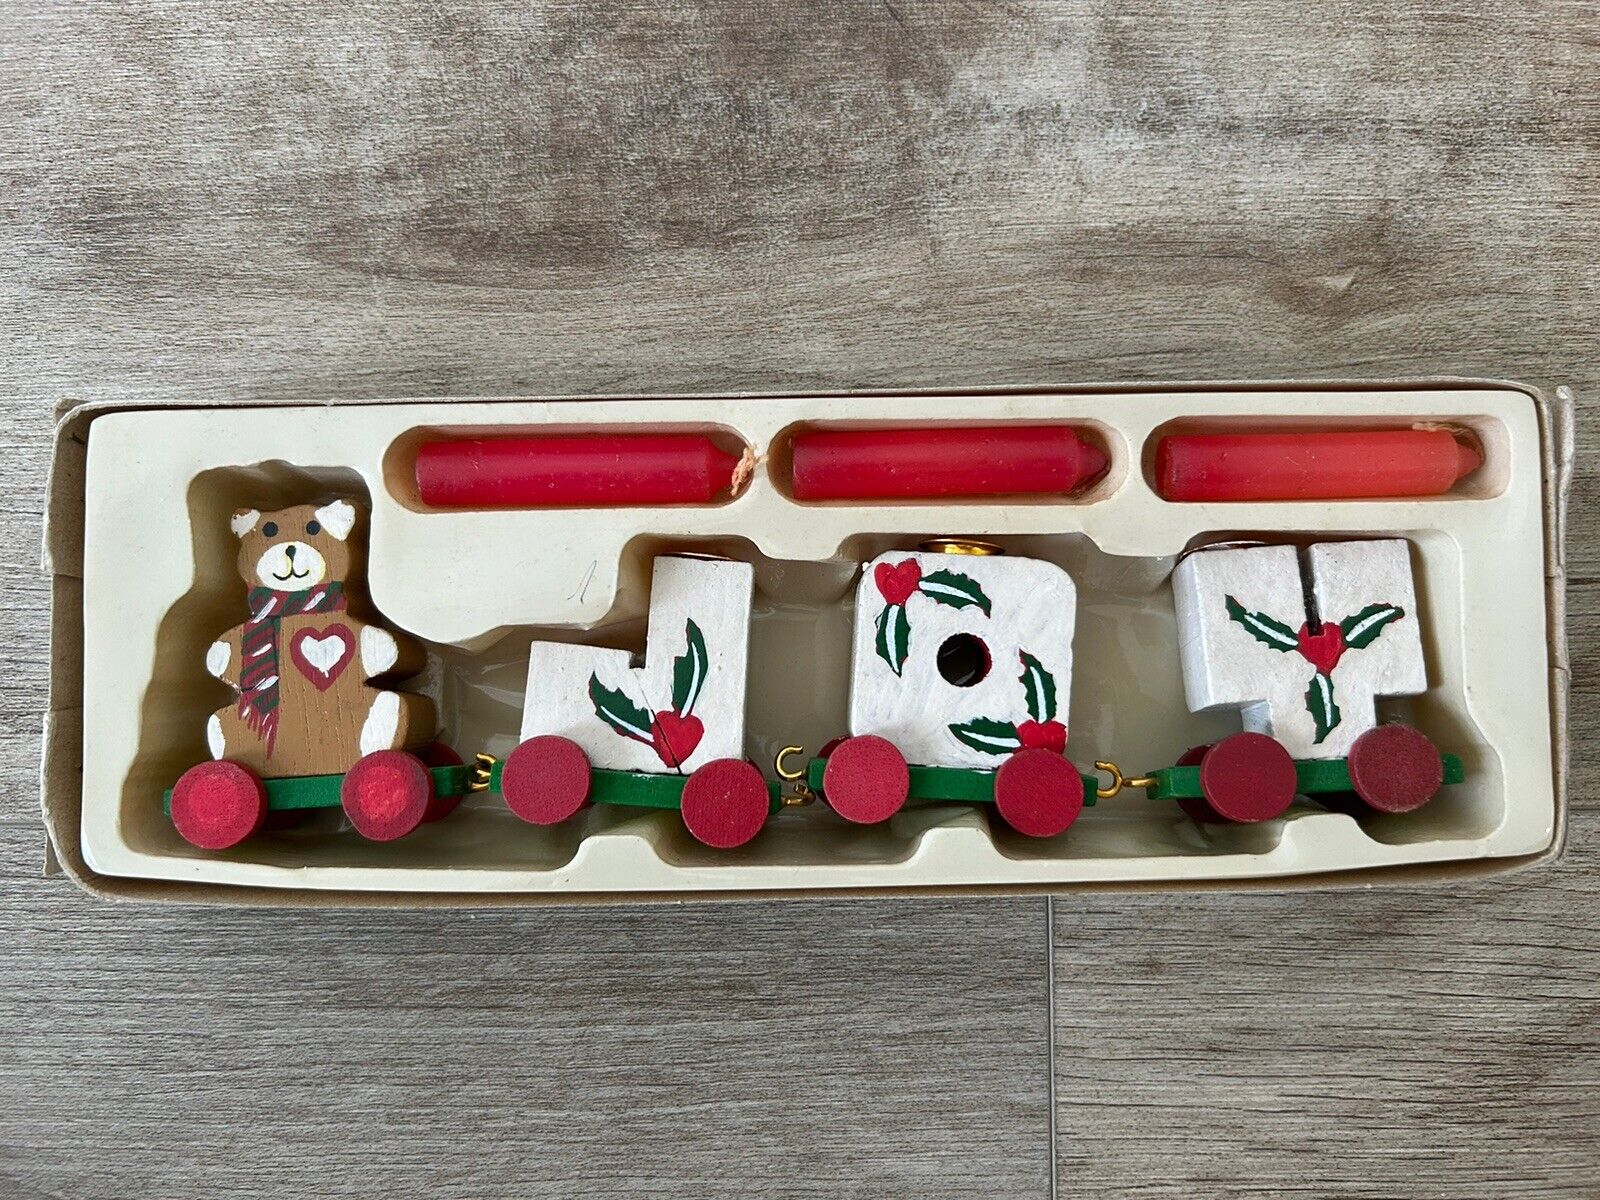 New Vintage 80’s Christmas Wooden Joy Train Candle Set With Bear